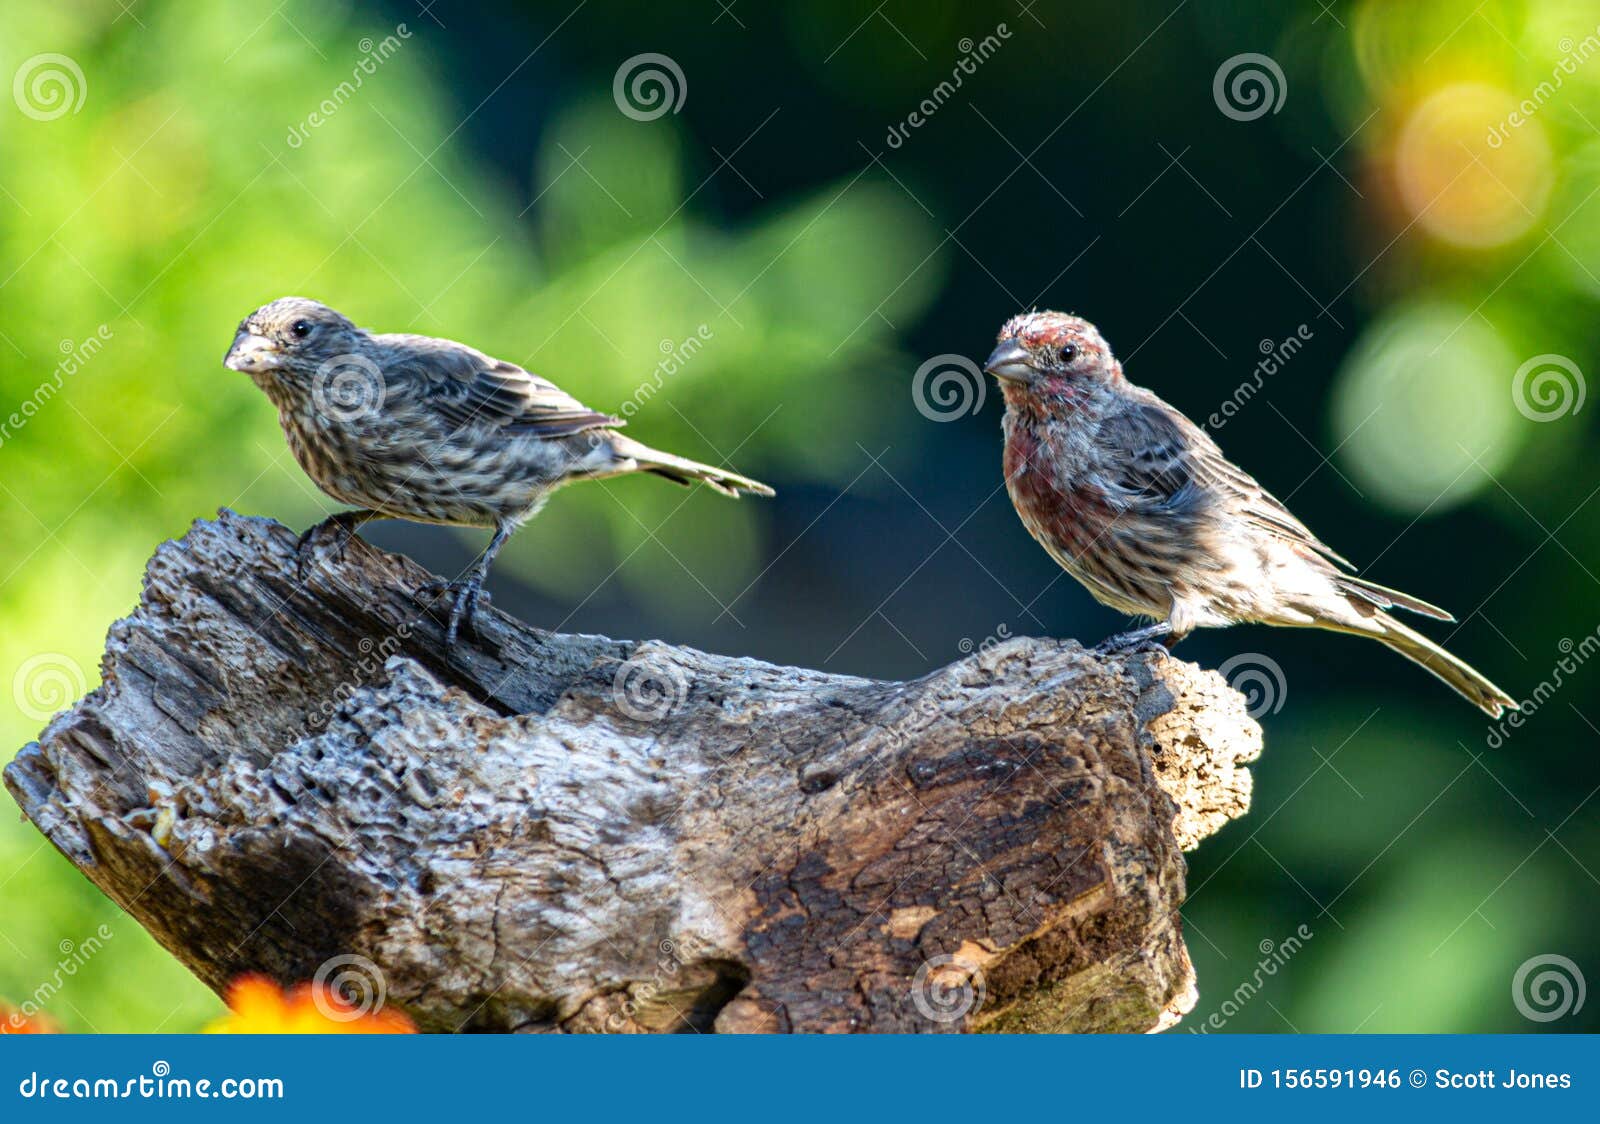 Male And Female House Finches Stock Photo Image Of Nature Finches 156591946,Three Way Switch Diagram